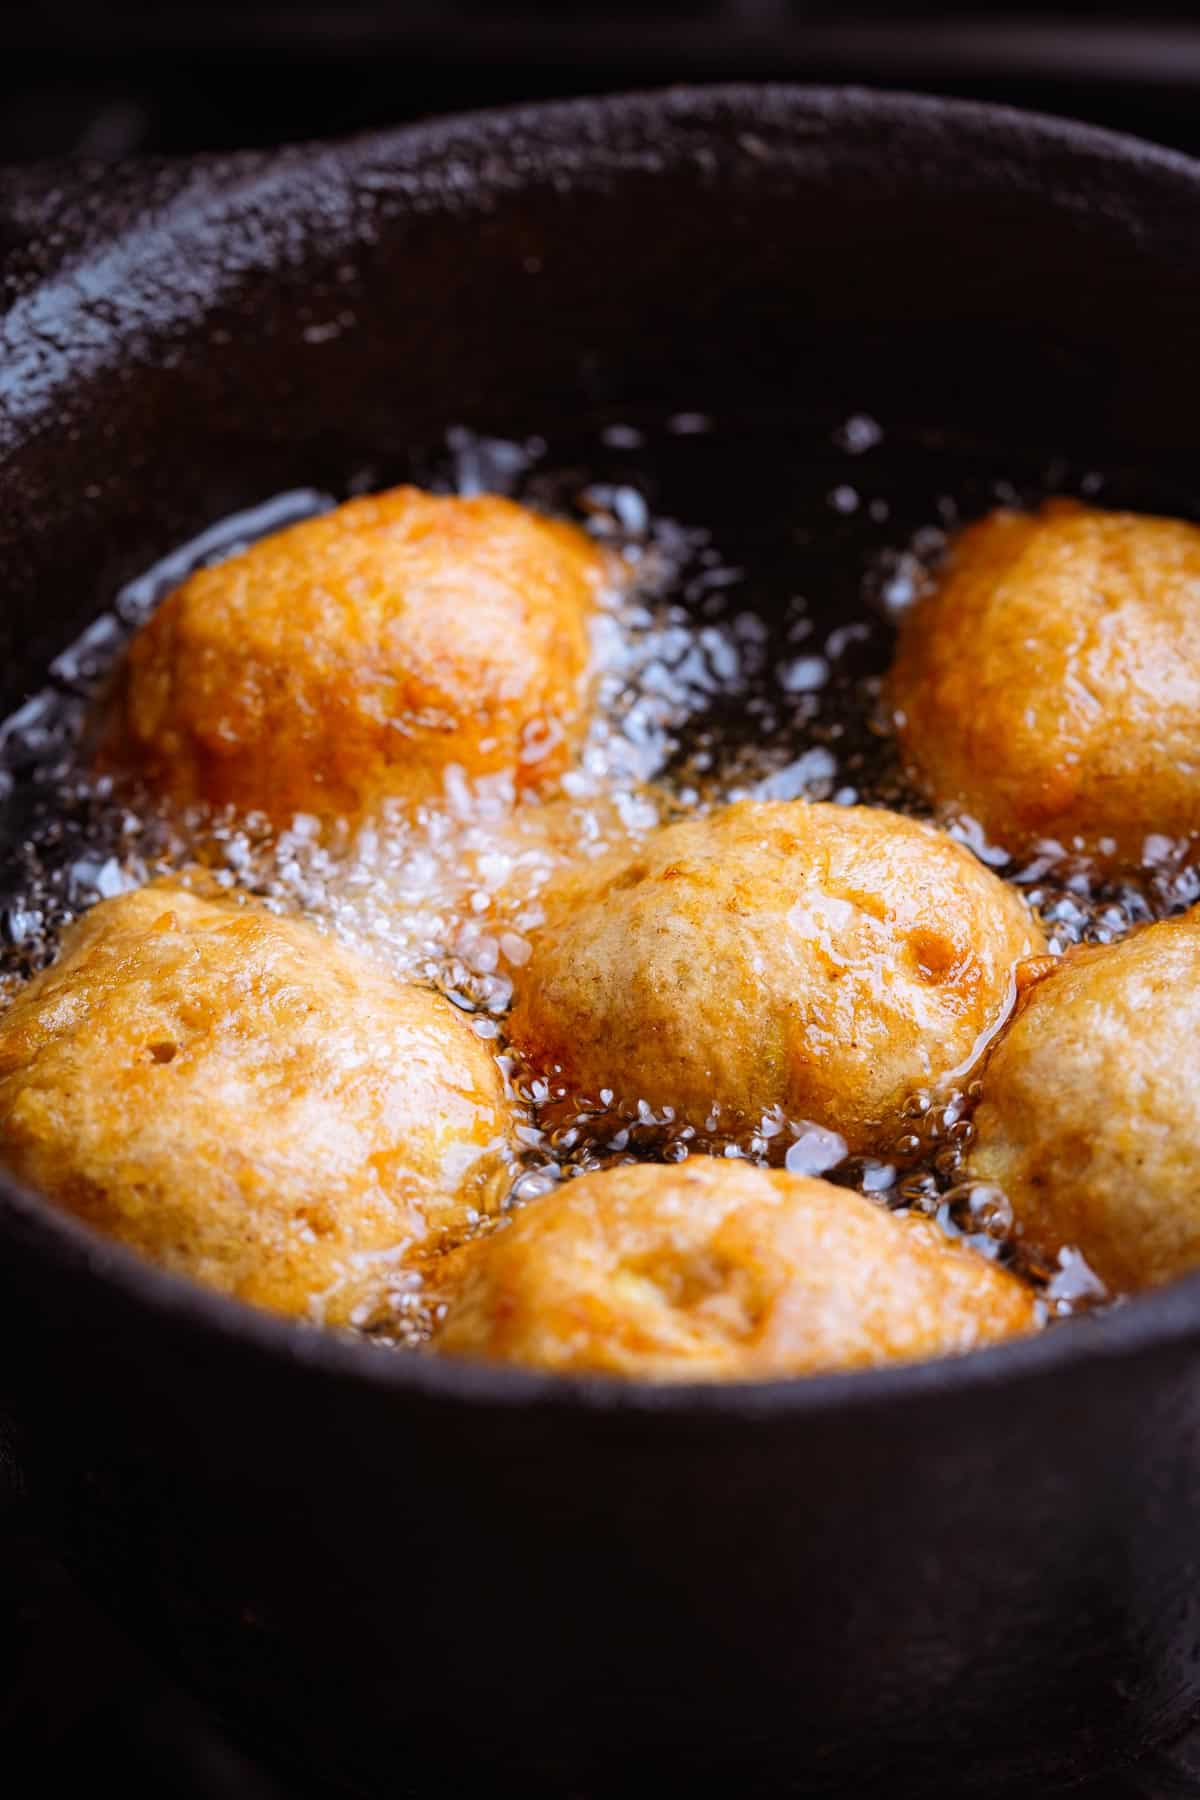 Fried balls of banana batter cooking in a cast iron pot of oil.